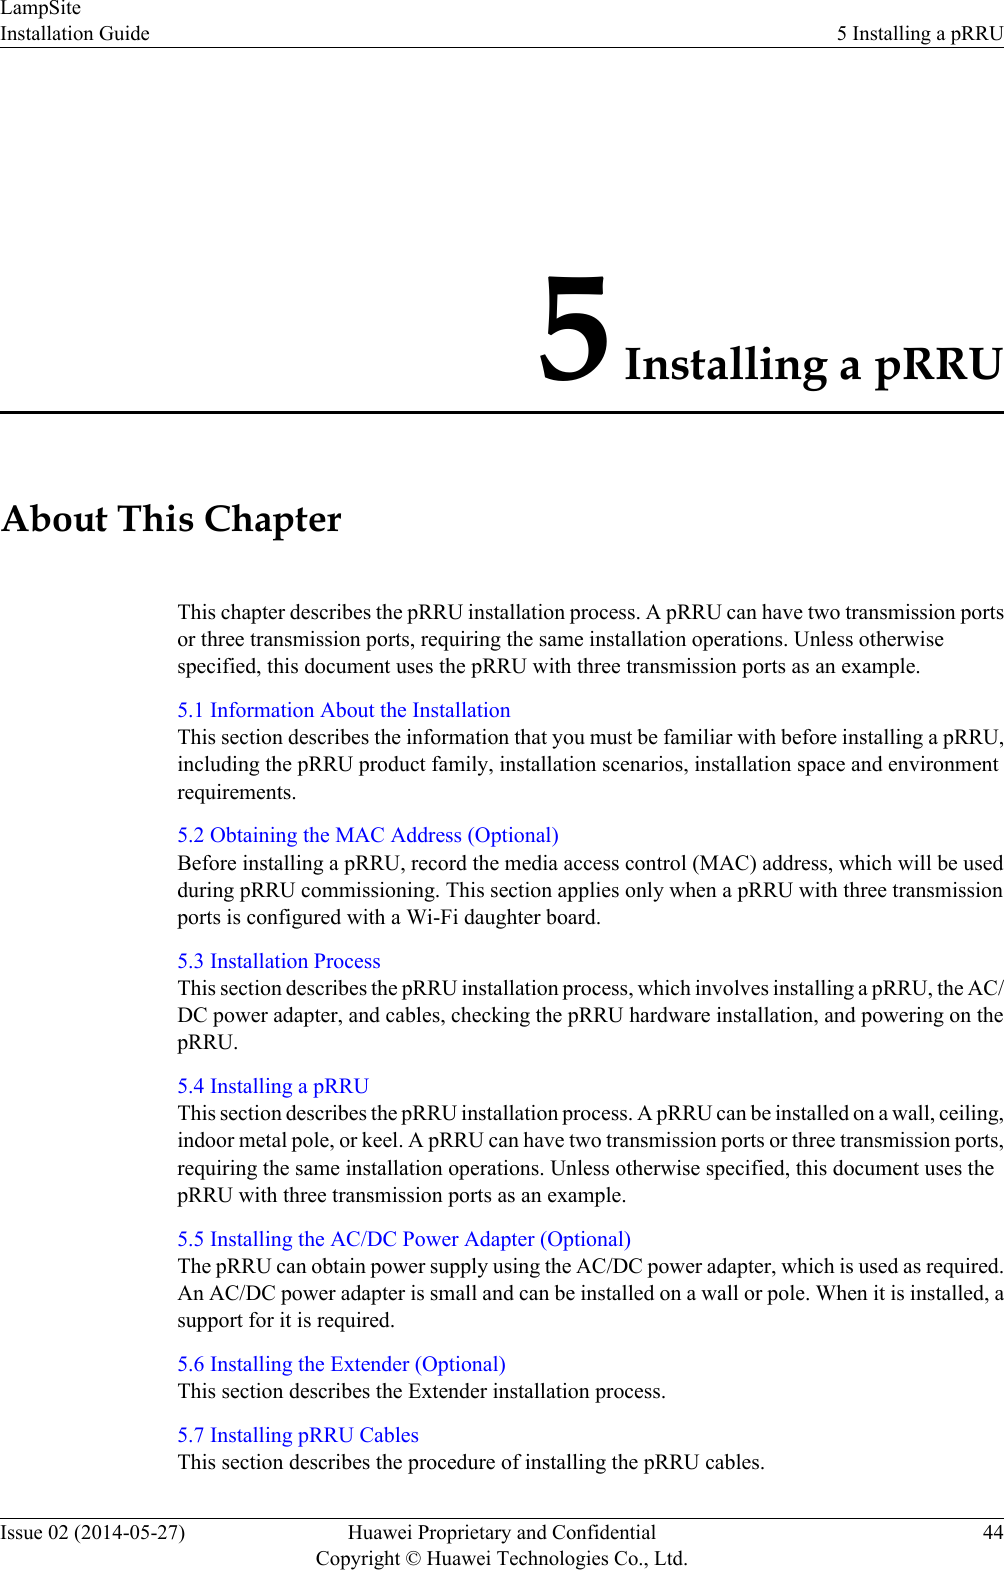 5 Installing a pRRUAbout This ChapterThis chapter describes the pRRU installation process. A pRRU can have two transmission portsor three transmission ports, requiring the same installation operations. Unless otherwisespecified, this document uses the pRRU with three transmission ports as an example.5.1 Information About the InstallationThis section describes the information that you must be familiar with before installing a pRRU,including the pRRU product family, installation scenarios, installation space and environmentrequirements.5.2 Obtaining the MAC Address (Optional)Before installing a pRRU, record the media access control (MAC) address, which will be usedduring pRRU commissioning. This section applies only when a pRRU with three transmissionports is configured with a Wi-Fi daughter board.5.3 Installation ProcessThis section describes the pRRU installation process, which involves installing a pRRU, the AC/DC power adapter, and cables, checking the pRRU hardware installation, and powering on thepRRU.5.4 Installing a pRRUThis section describes the pRRU installation process. A pRRU can be installed on a wall, ceiling,indoor metal pole, or keel. A pRRU can have two transmission ports or three transmission ports,requiring the same installation operations. Unless otherwise specified, this document uses thepRRU with three transmission ports as an example.5.5 Installing the AC/DC Power Adapter (Optional)The pRRU can obtain power supply using the AC/DC power adapter, which is used as required.An AC/DC power adapter is small and can be installed on a wall or pole. When it is installed, asupport for it is required.5.6 Installing the Extender (Optional)This section describes the Extender installation process.5.7 Installing pRRU CablesThis section describes the procedure of installing the pRRU cables.LampSiteInstallation Guide 5 Installing a pRRUIssue 02 (2014-05-27) Huawei Proprietary and ConfidentialCopyright © Huawei Technologies Co., Ltd.44